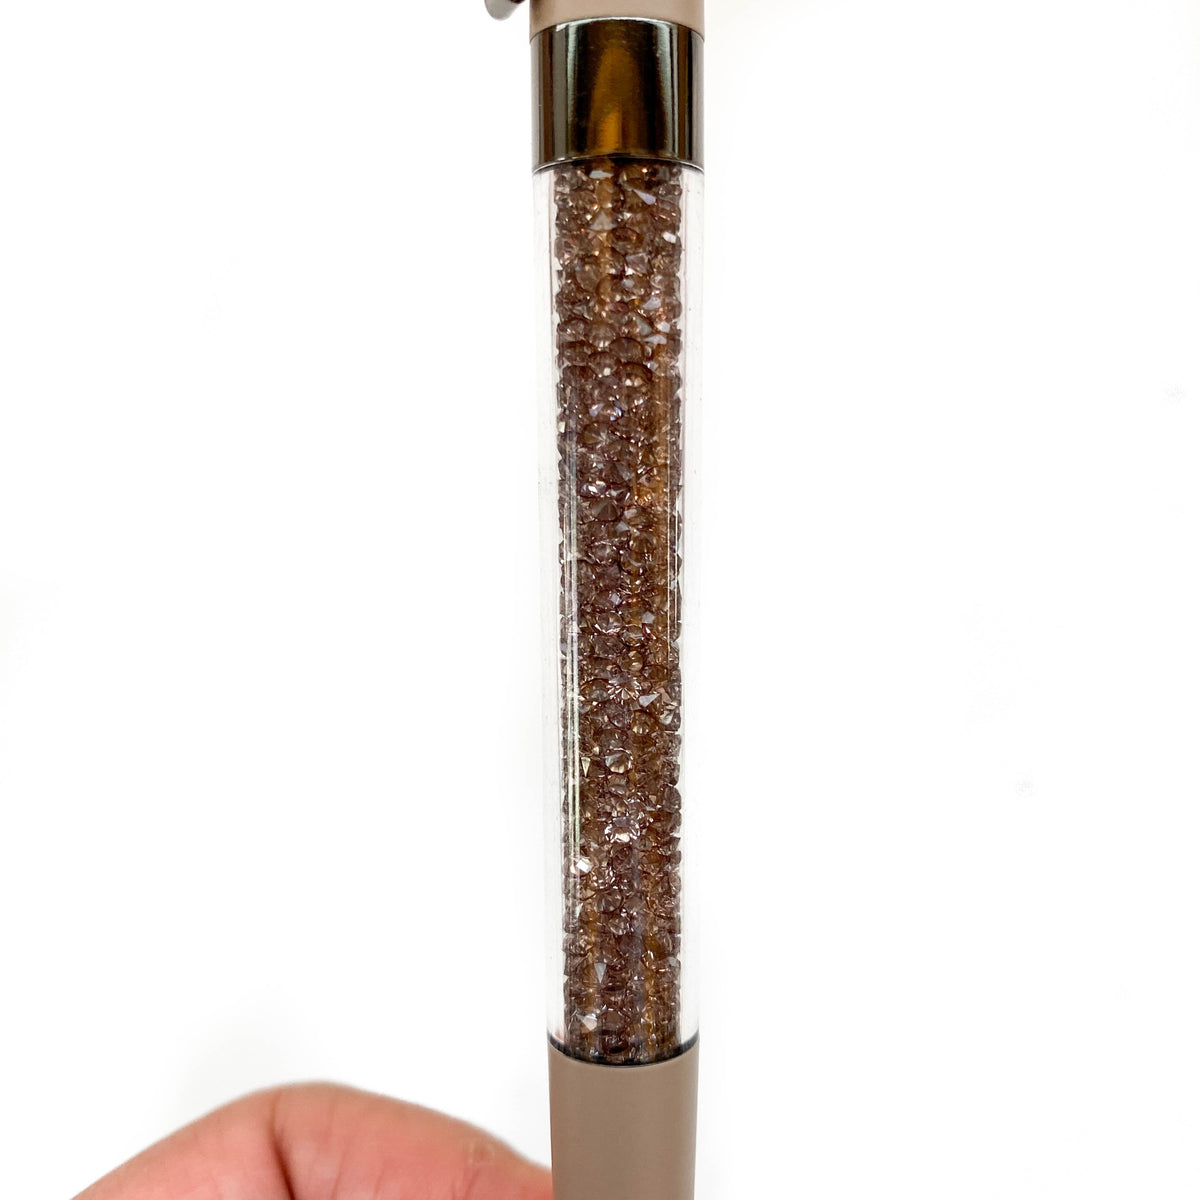 Cement Imperfect Crystal VBPen | limited pen